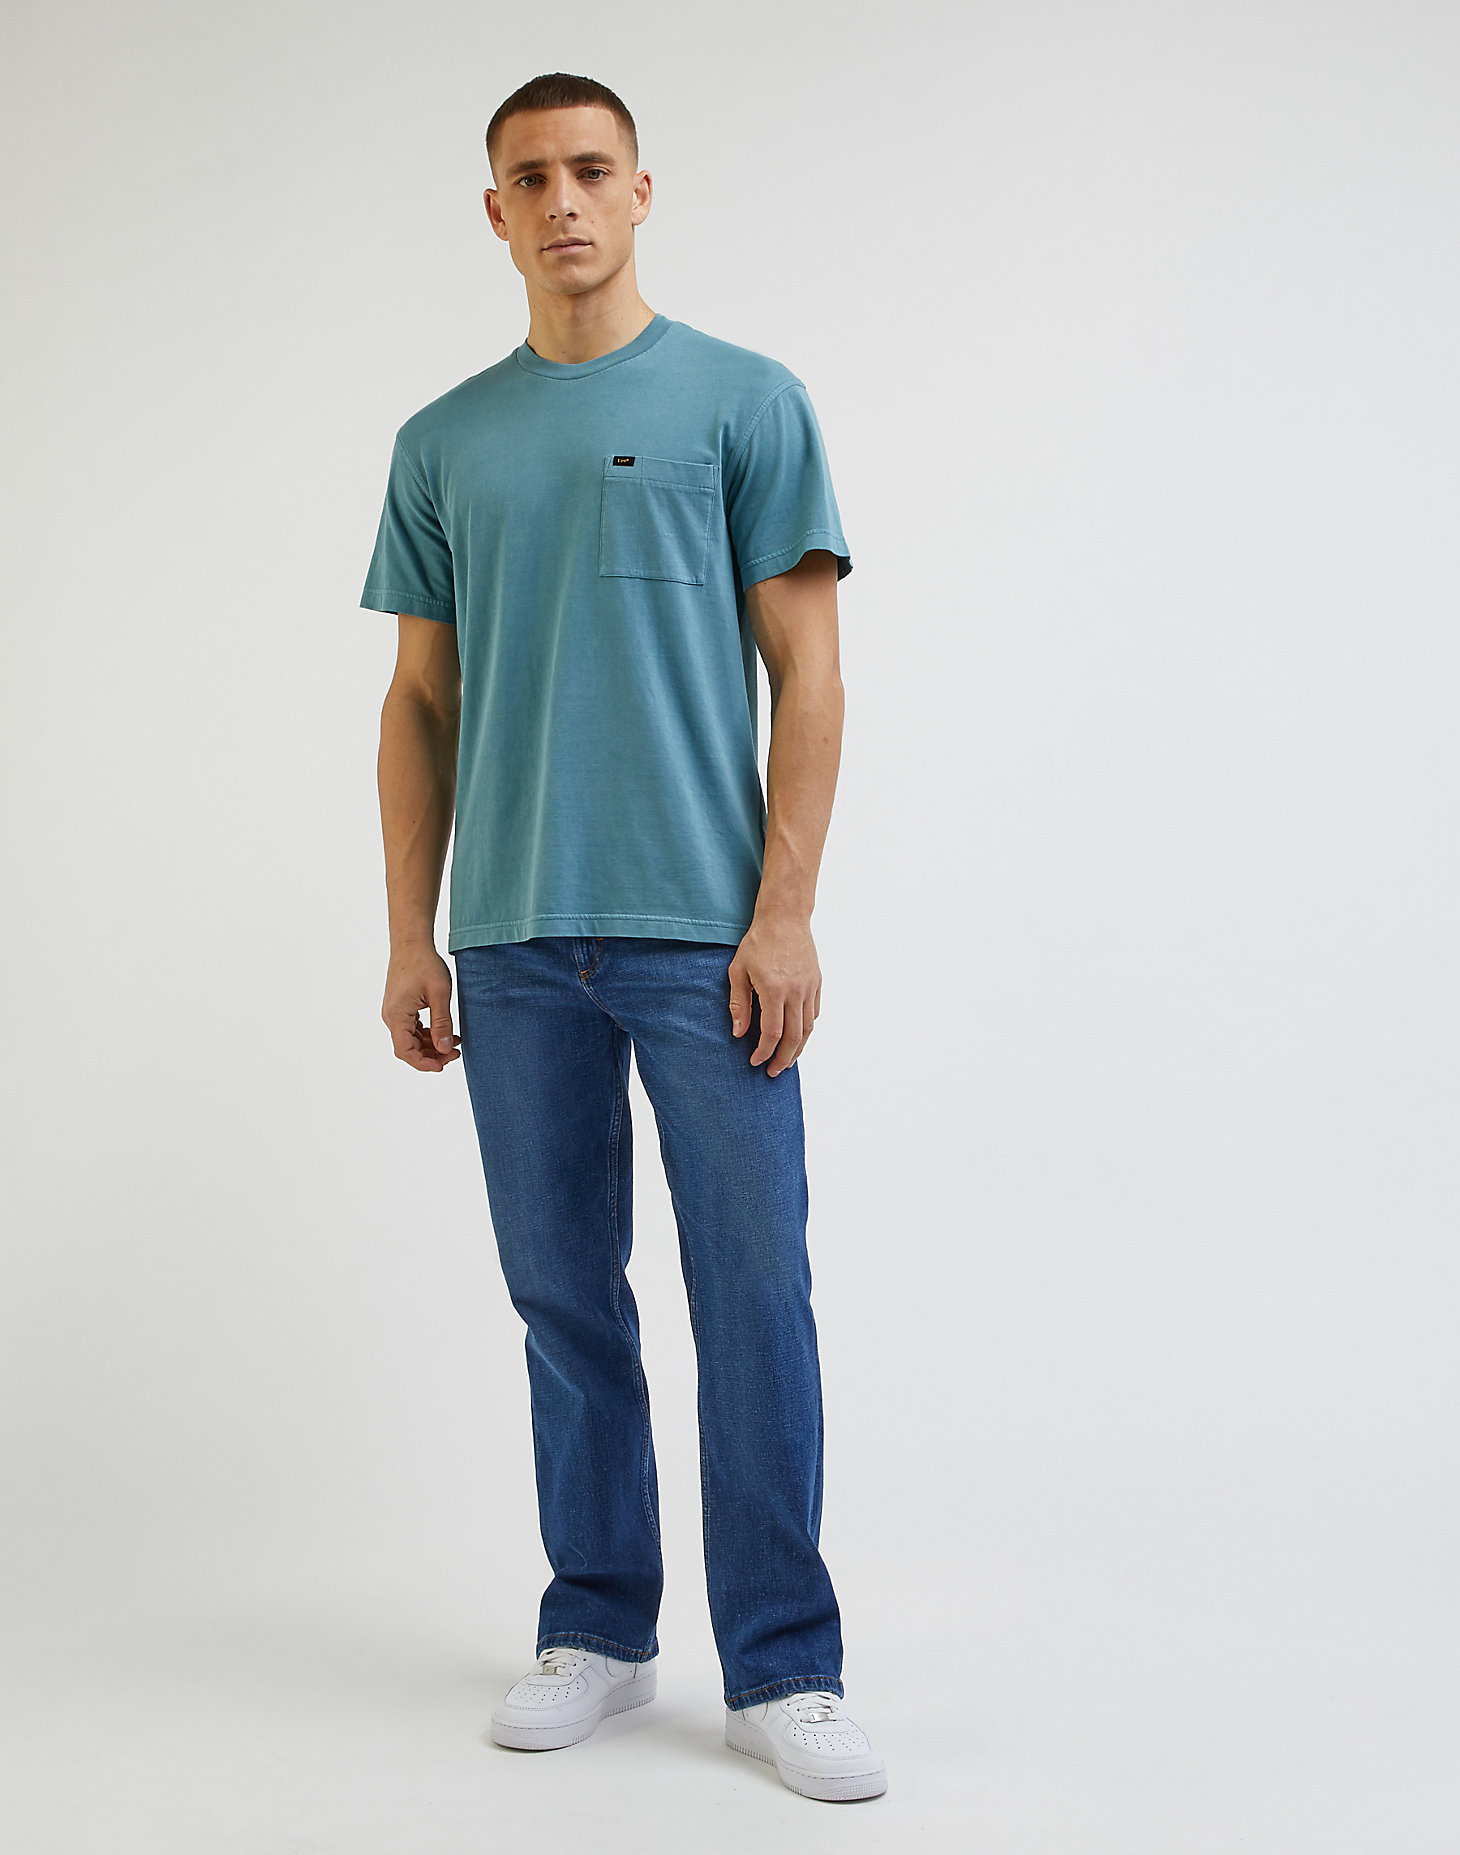 Relaxed Pocket Tee in Eden alternative view 2